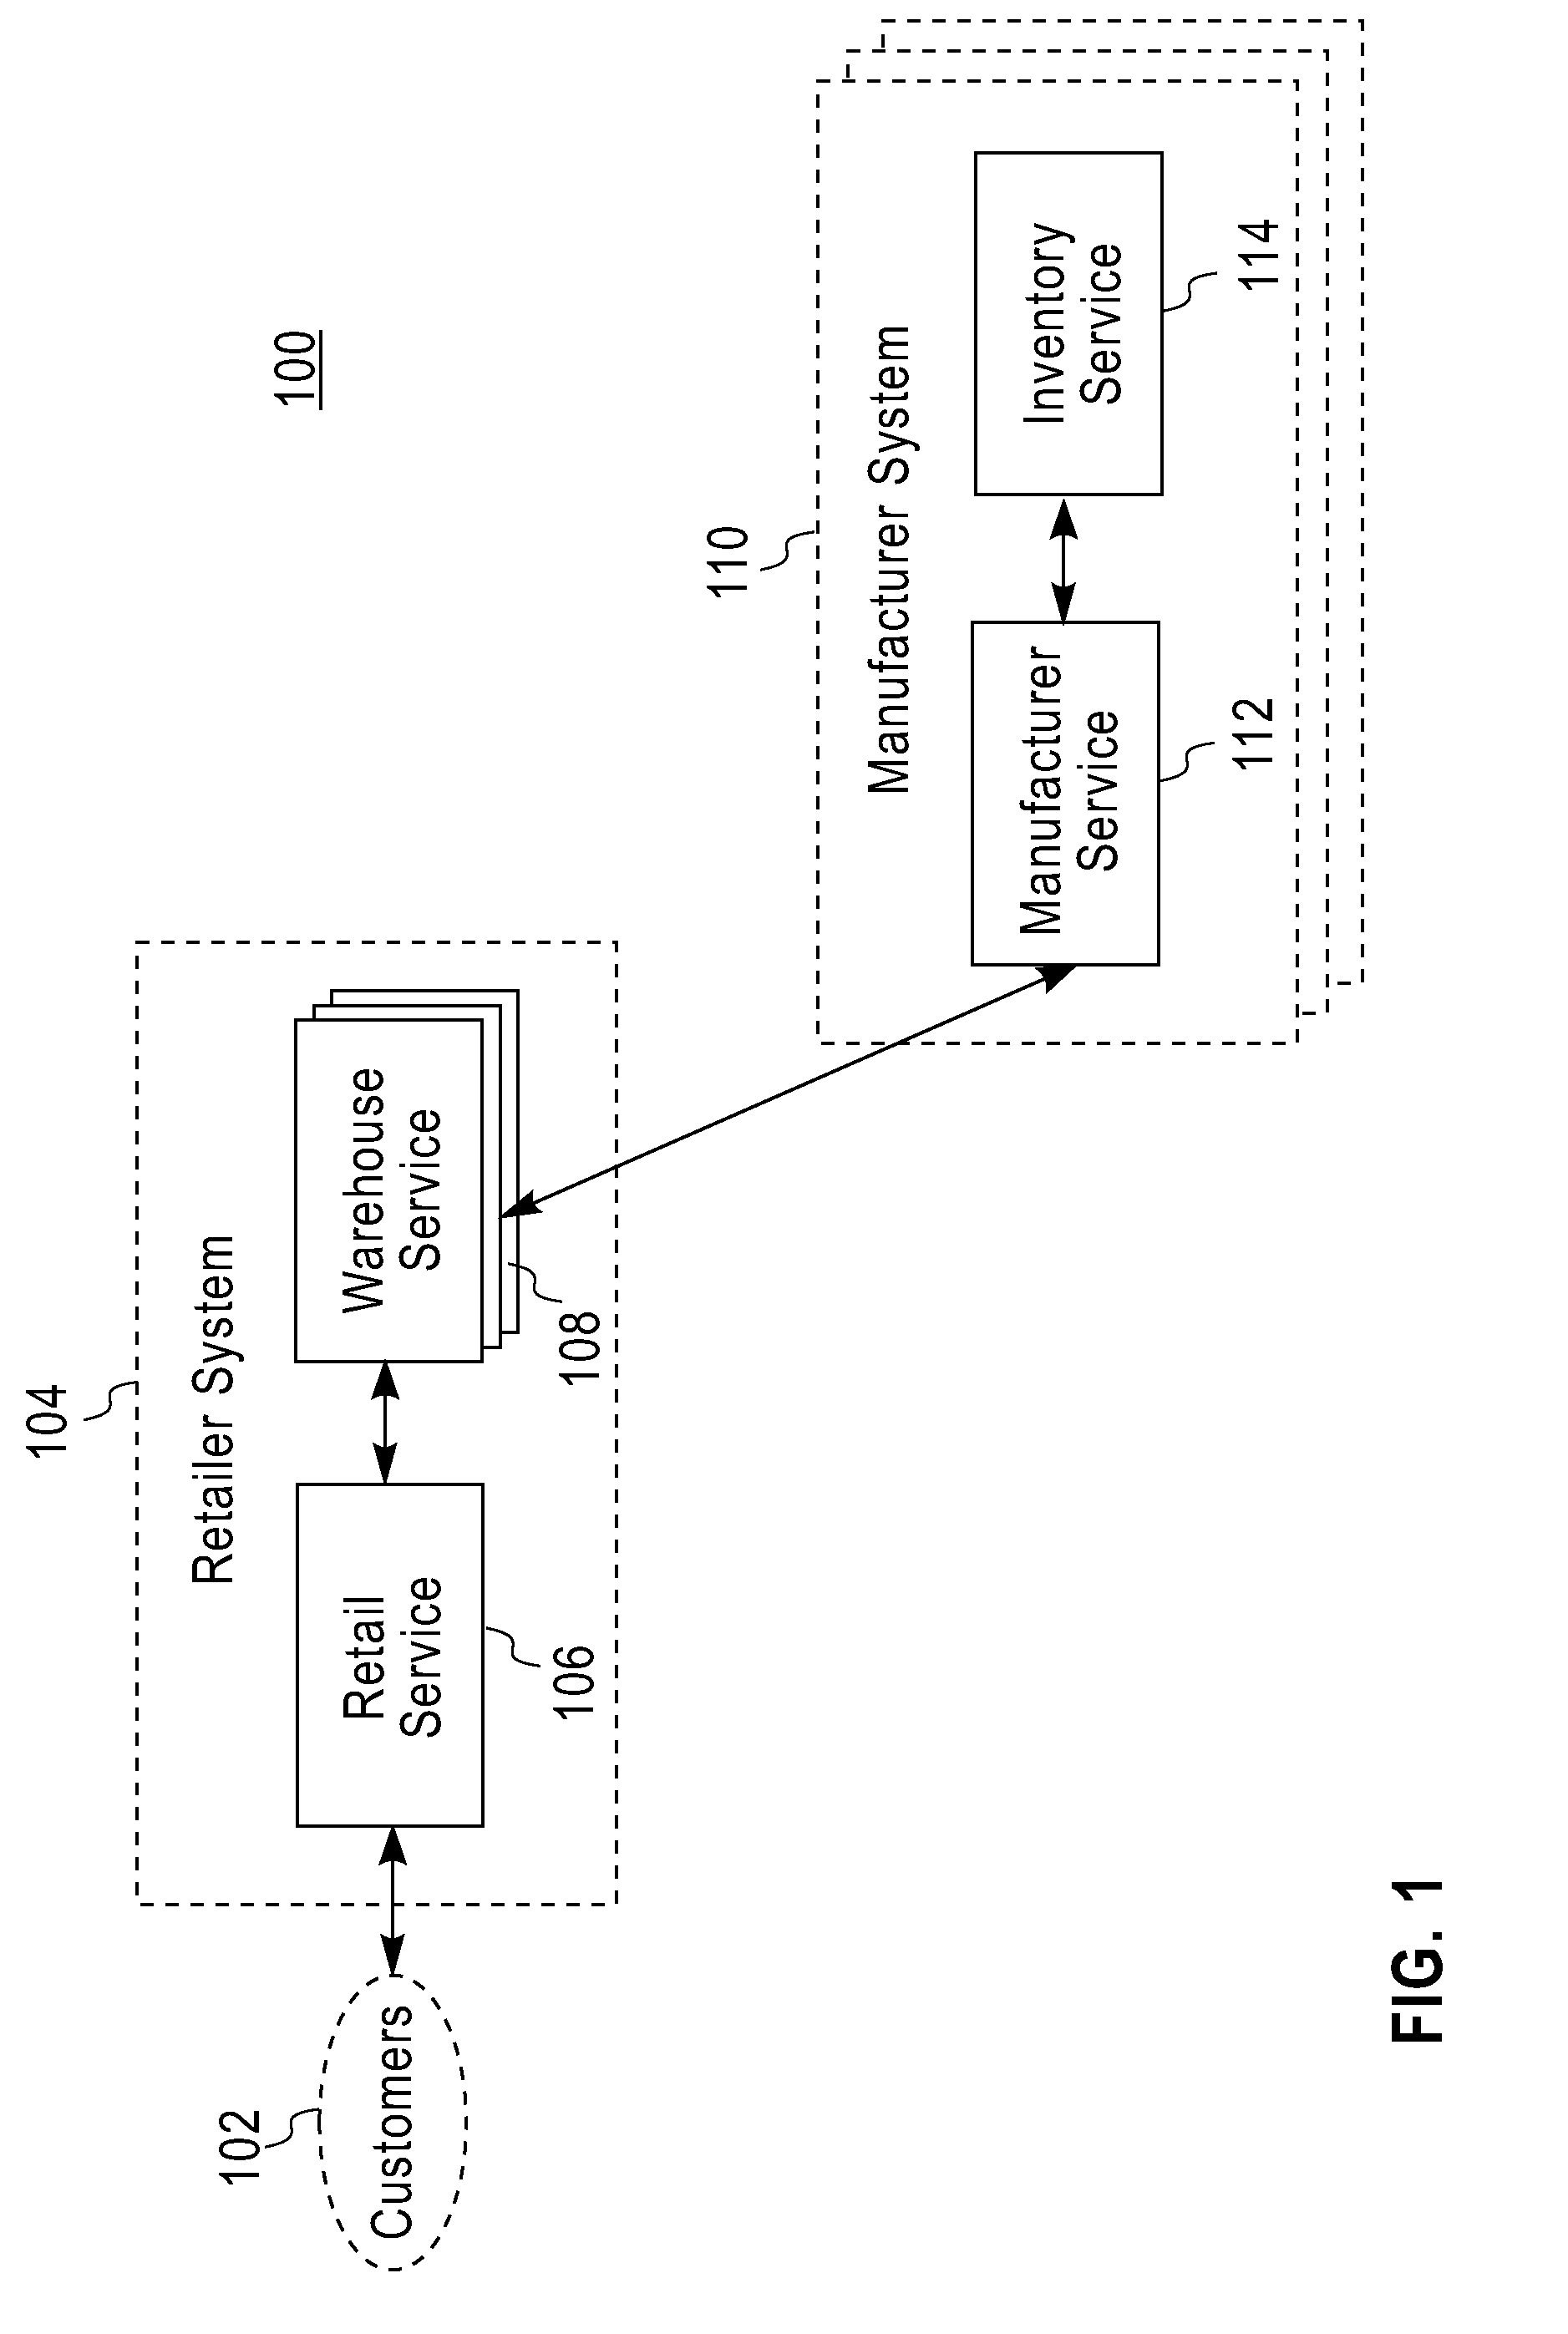 Methods and apparatus for access control in service-oriented computing environments